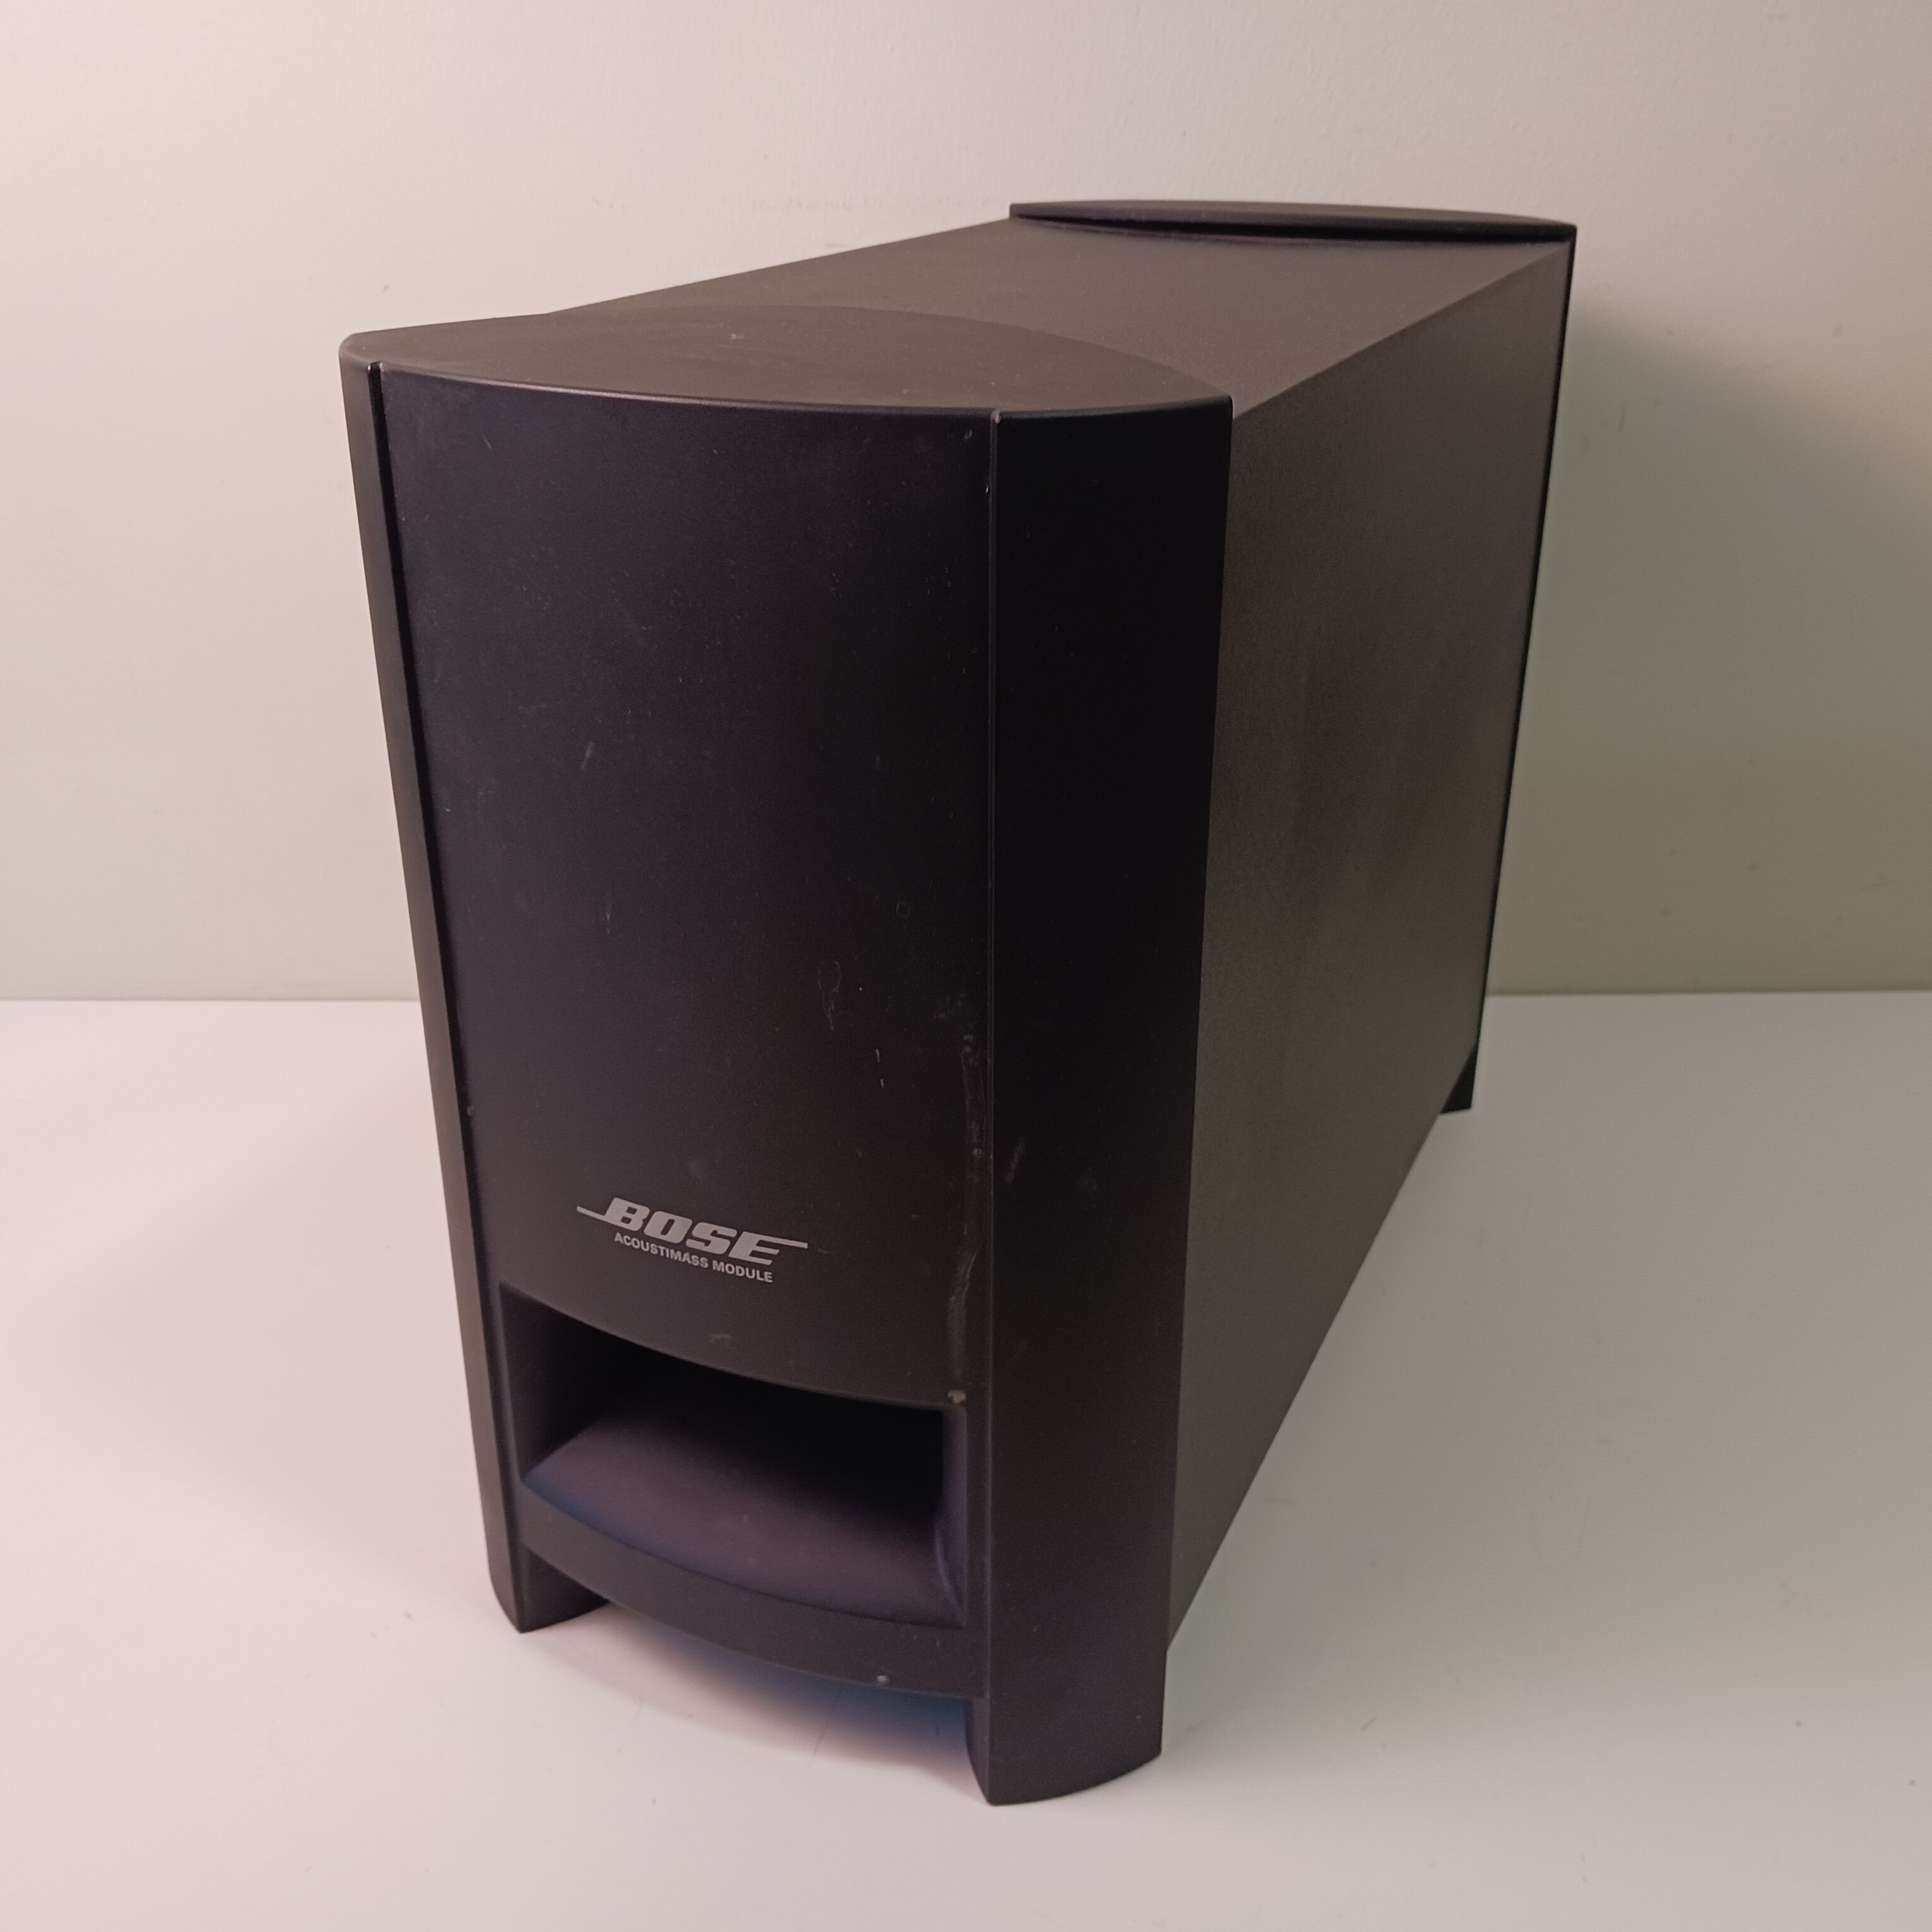 Buy the Bose Cinemate GS Series II Digital Home Theater System